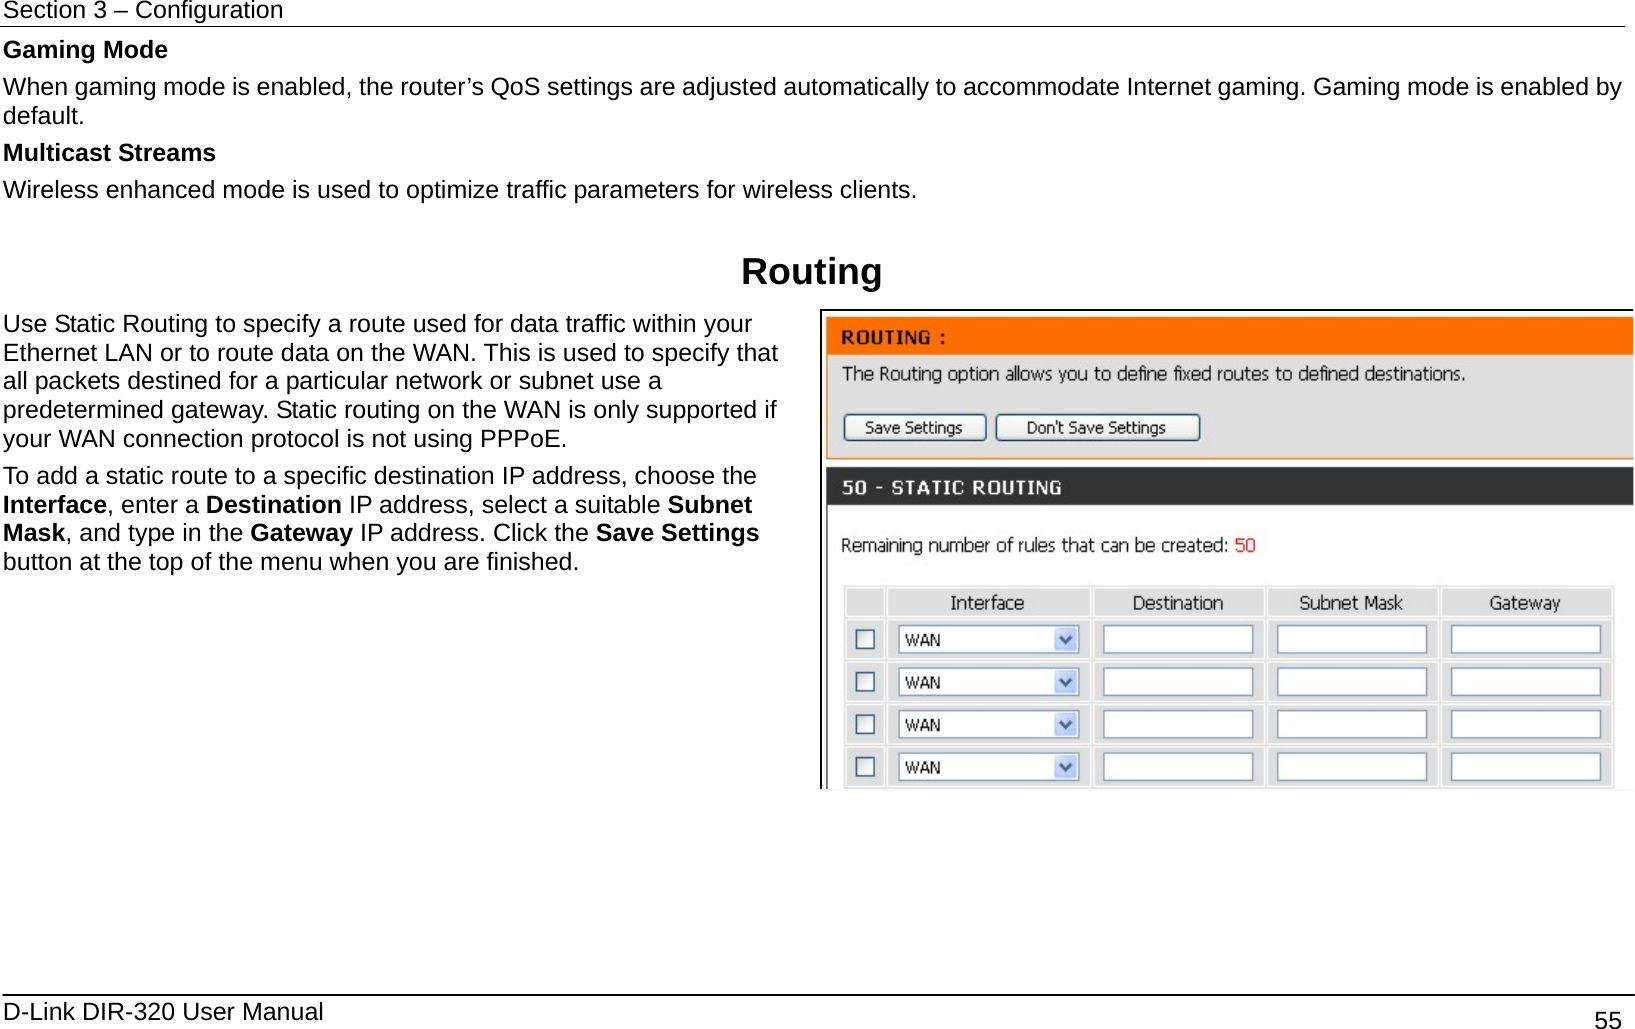 Section 3 – Configuration   D-Link DIR-320 User Manual                                       55 Gaming Mode When gaming mode is enabled, the router’s QoS settings are adjusted automatically to accommodate Internet gaming. Gaming mode is enabled by default.  Multicast Streams Wireless enhanced mode is used to optimize traffic parameters for wireless clients.  Routing Use Static Routing to specify a route used for data traffic within your Ethernet LAN or to route data on the WAN. This is used to specify that all packets destined for a particular network or subnet use a predetermined gateway. Static routing on the WAN is only supported if your WAN connection protocol is not using PPPoE. To add a static route to a specific destination IP address, choose the Interface, enter a Destination IP address, select a suitable Subnet Mask, and type in the Gateway IP address. Click the Save Settings button at the top of the menu when you are finished.     